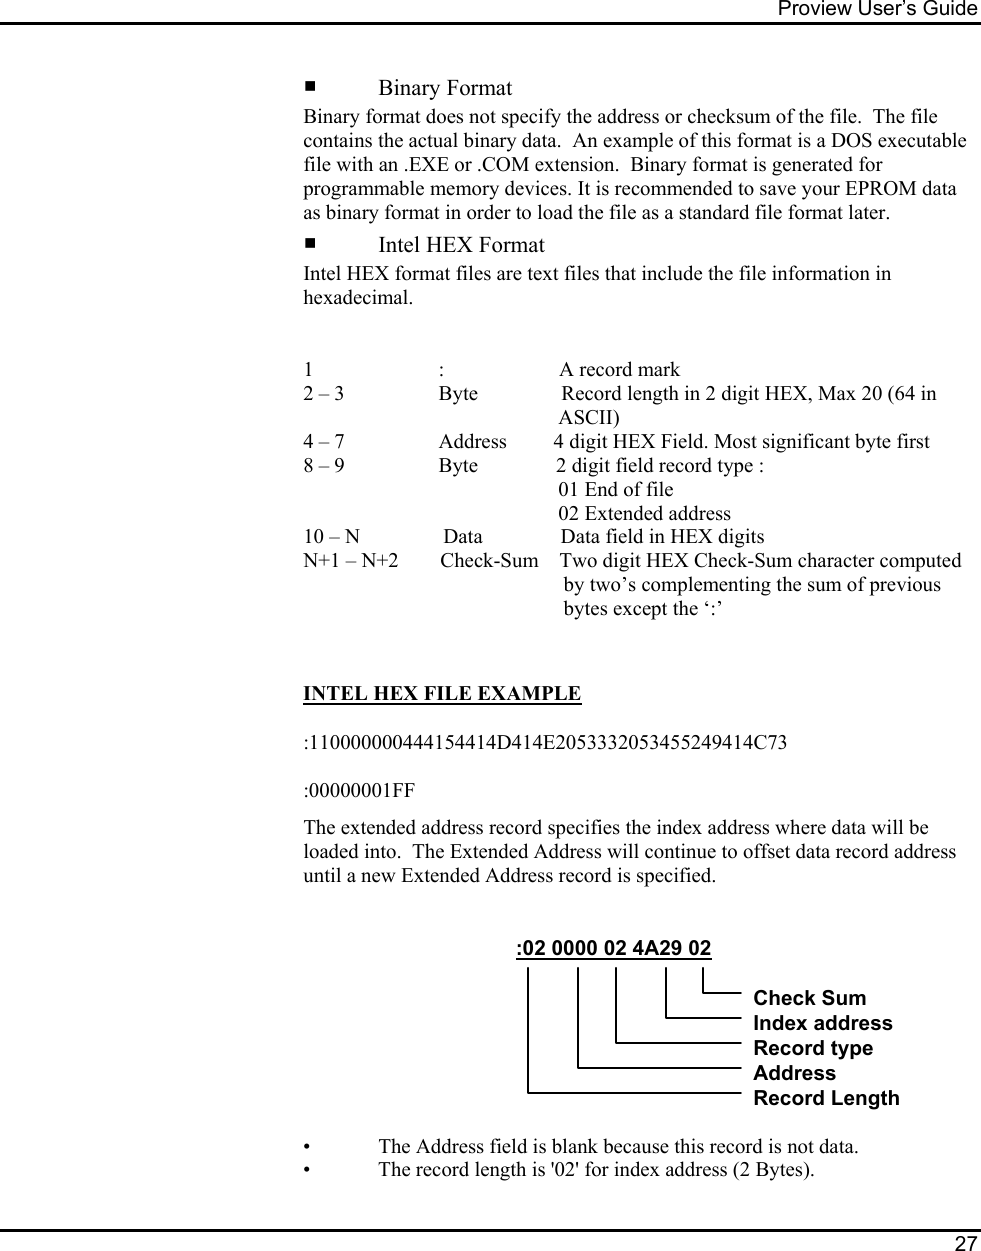 Proview User’s Guide  27       Binary Format Binary format does not specify the address or checksum of the file.  The file contains the actual binary data.  An example of this format is a DOS executable file with an .EXE or .COM extension.  Binary format is generated for programmable memory devices. It is recommended to save your EPROM data as binary format in order to load the file as a standard file format later.    Intel HEX Format Intel HEX format files are text files that include the file information in hexadecimal.      1                        :                      A record mark 2 – 3                  Byte                Record length in 2 digit HEX, Max 20 (64 in                                                   ASCII)   4 – 7                  Address         4 digit HEX Field. Most significant byte first    8 – 9                  Byte               2 digit field record type :                                                  01 End of file                                                     02 Extended address   10 – N                Data               Data field in HEX digits N+1 – N+2        Check-Sum    Two digit HEX Check-Sum character computed                                                    by two’s complementing the sum of previous                                                    bytes except the ‘:’    INTEL HEX FILE EXAMPLE  :110000000444154414D414E2053332053455249414C73  :00000001FF The extended address record specifies the index address where data will be loaded into.  The Extended Address will continue to offset data record address until a new Extended Address record is specified.                                                          :02 0000 02 4A29 02Check SumIndex addressRecord typeAddressRecord Length       •   The Address field is blank because this record is not data.     •   The record length is &apos;02&apos; for index address (2 Bytes). 